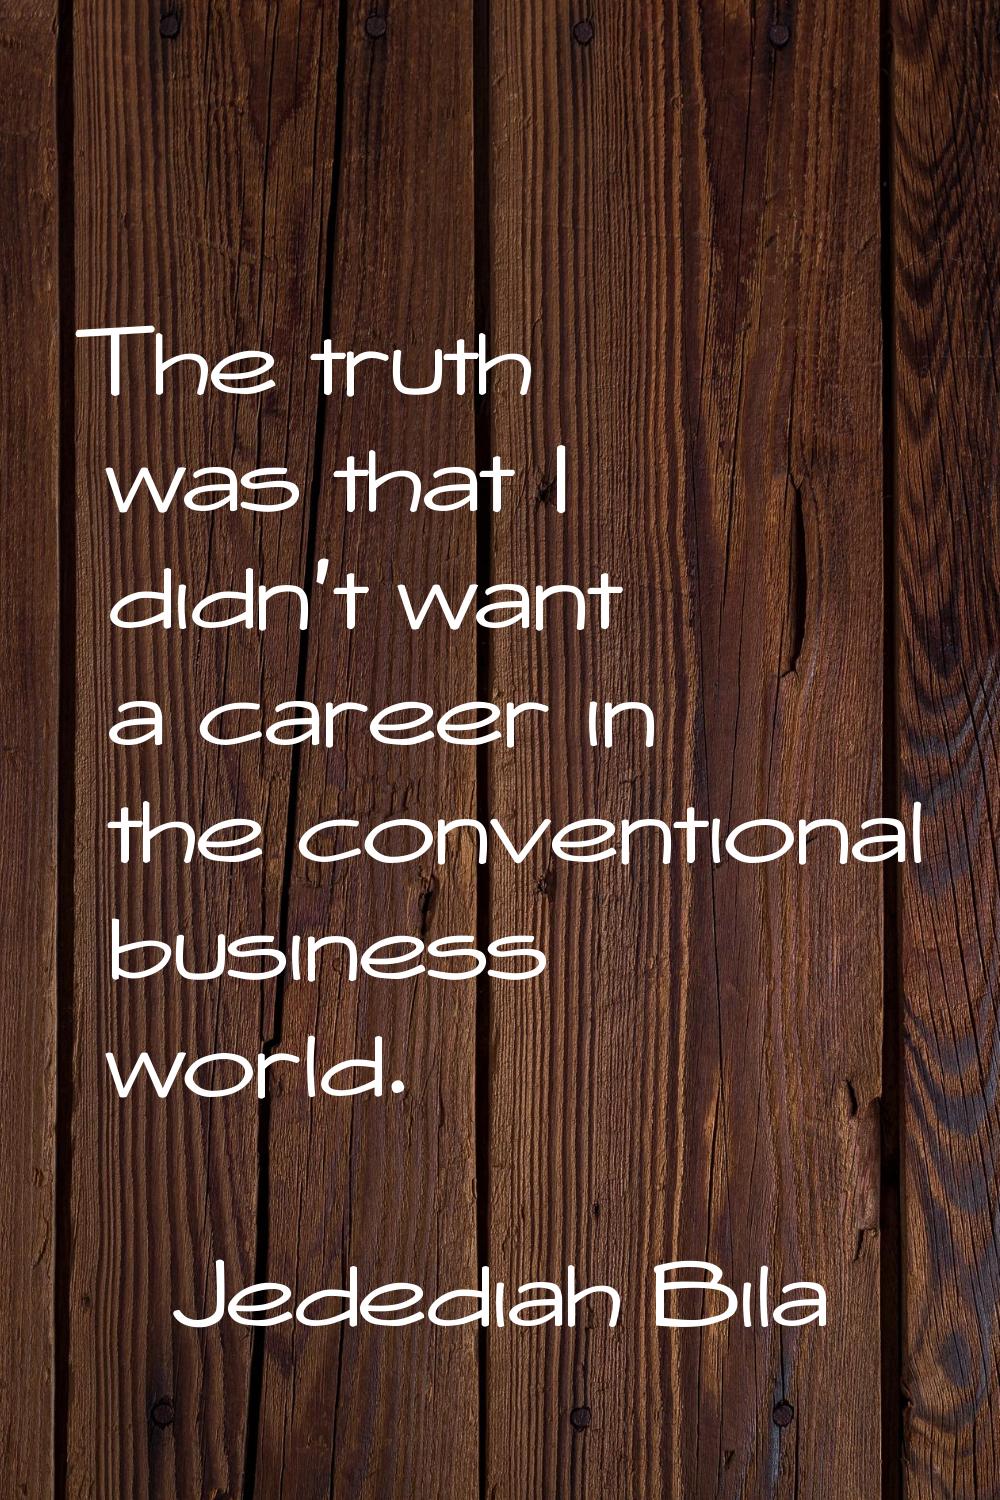 The truth was that I didn't want a career in the conventional business world.